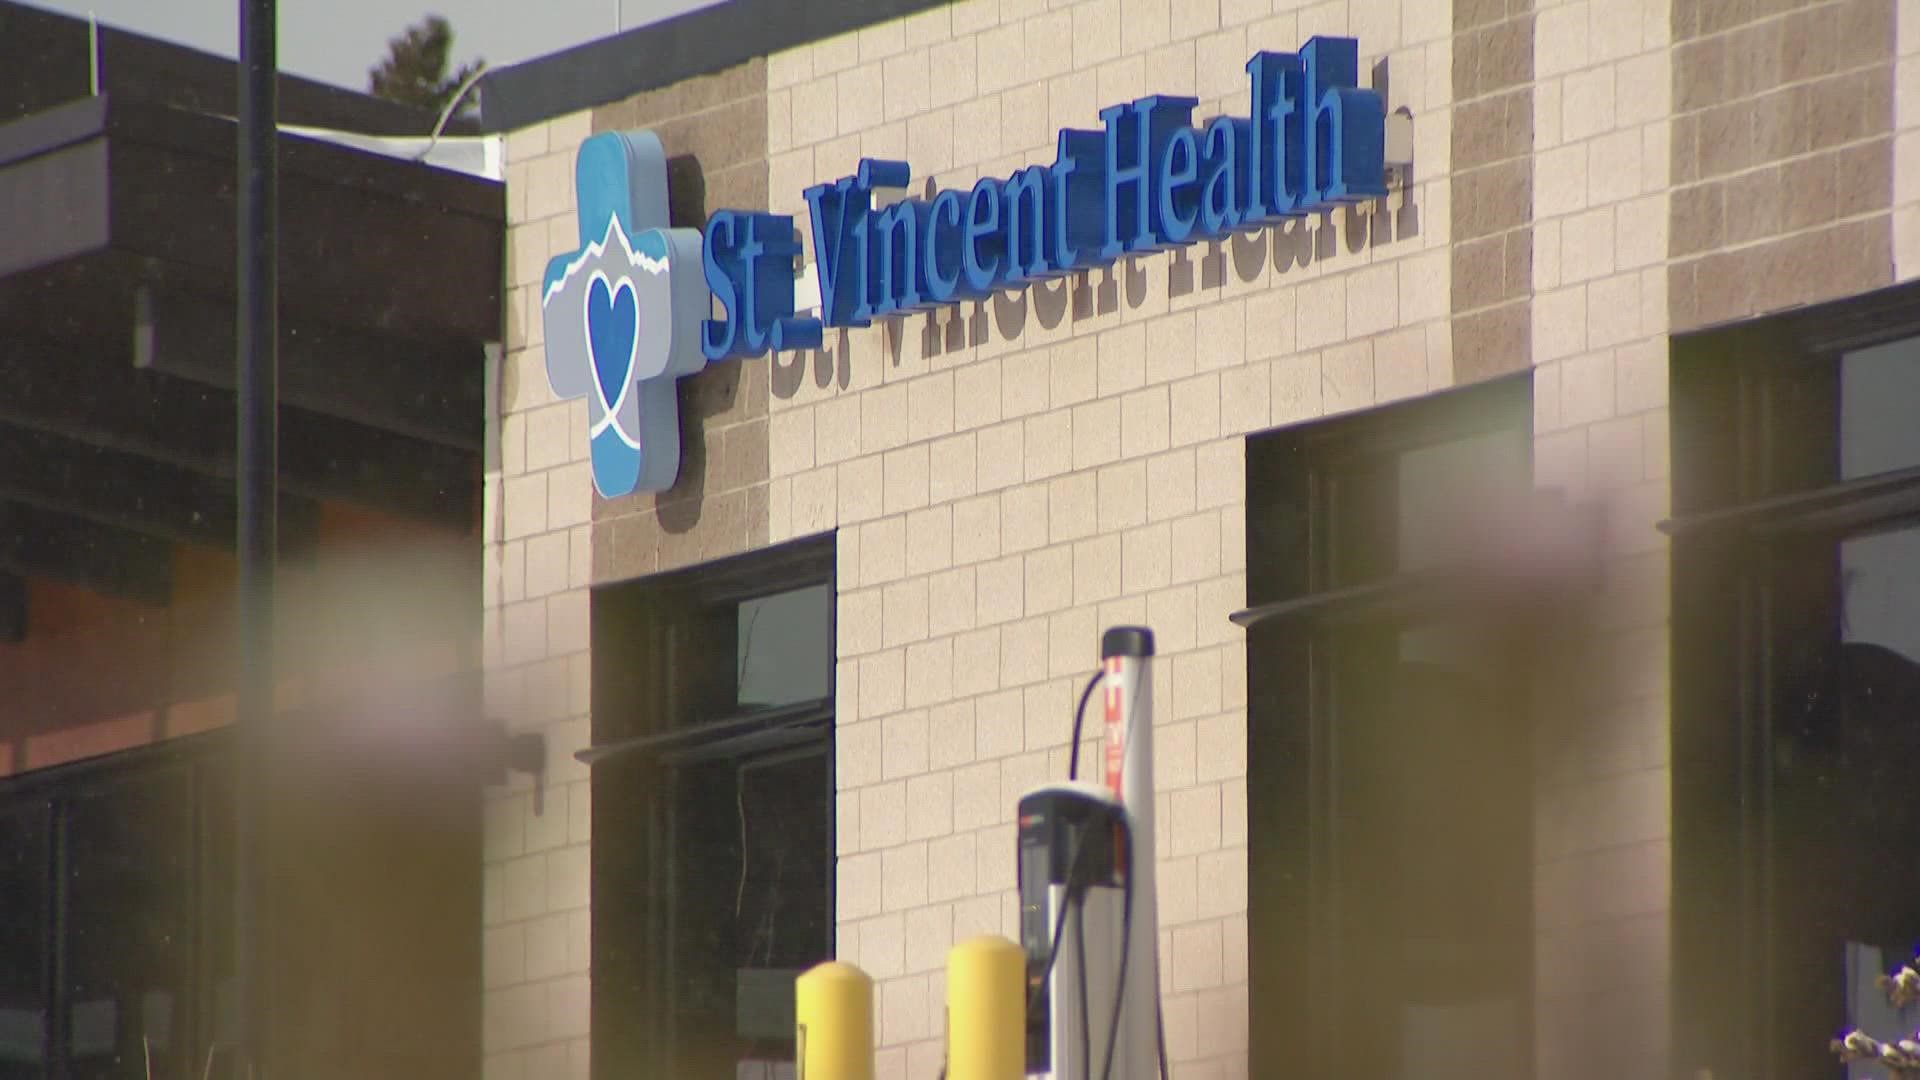 The hospital board of directors said they were expecting a cash advance that has not arrived yet.